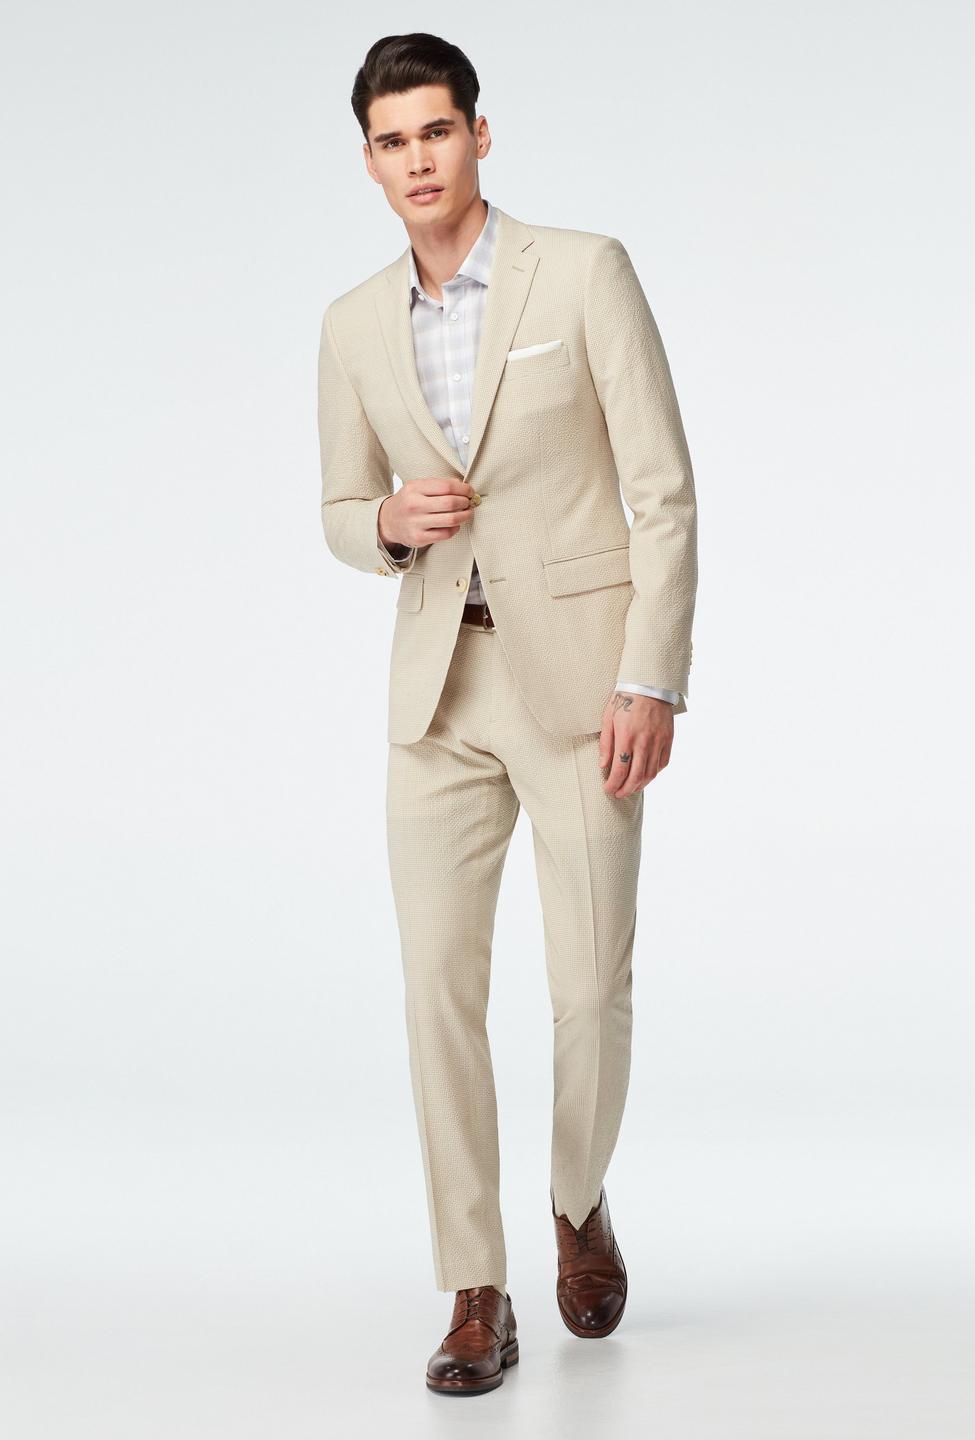 21 OnTrend Summer Wedding Suits for Every Dress Code